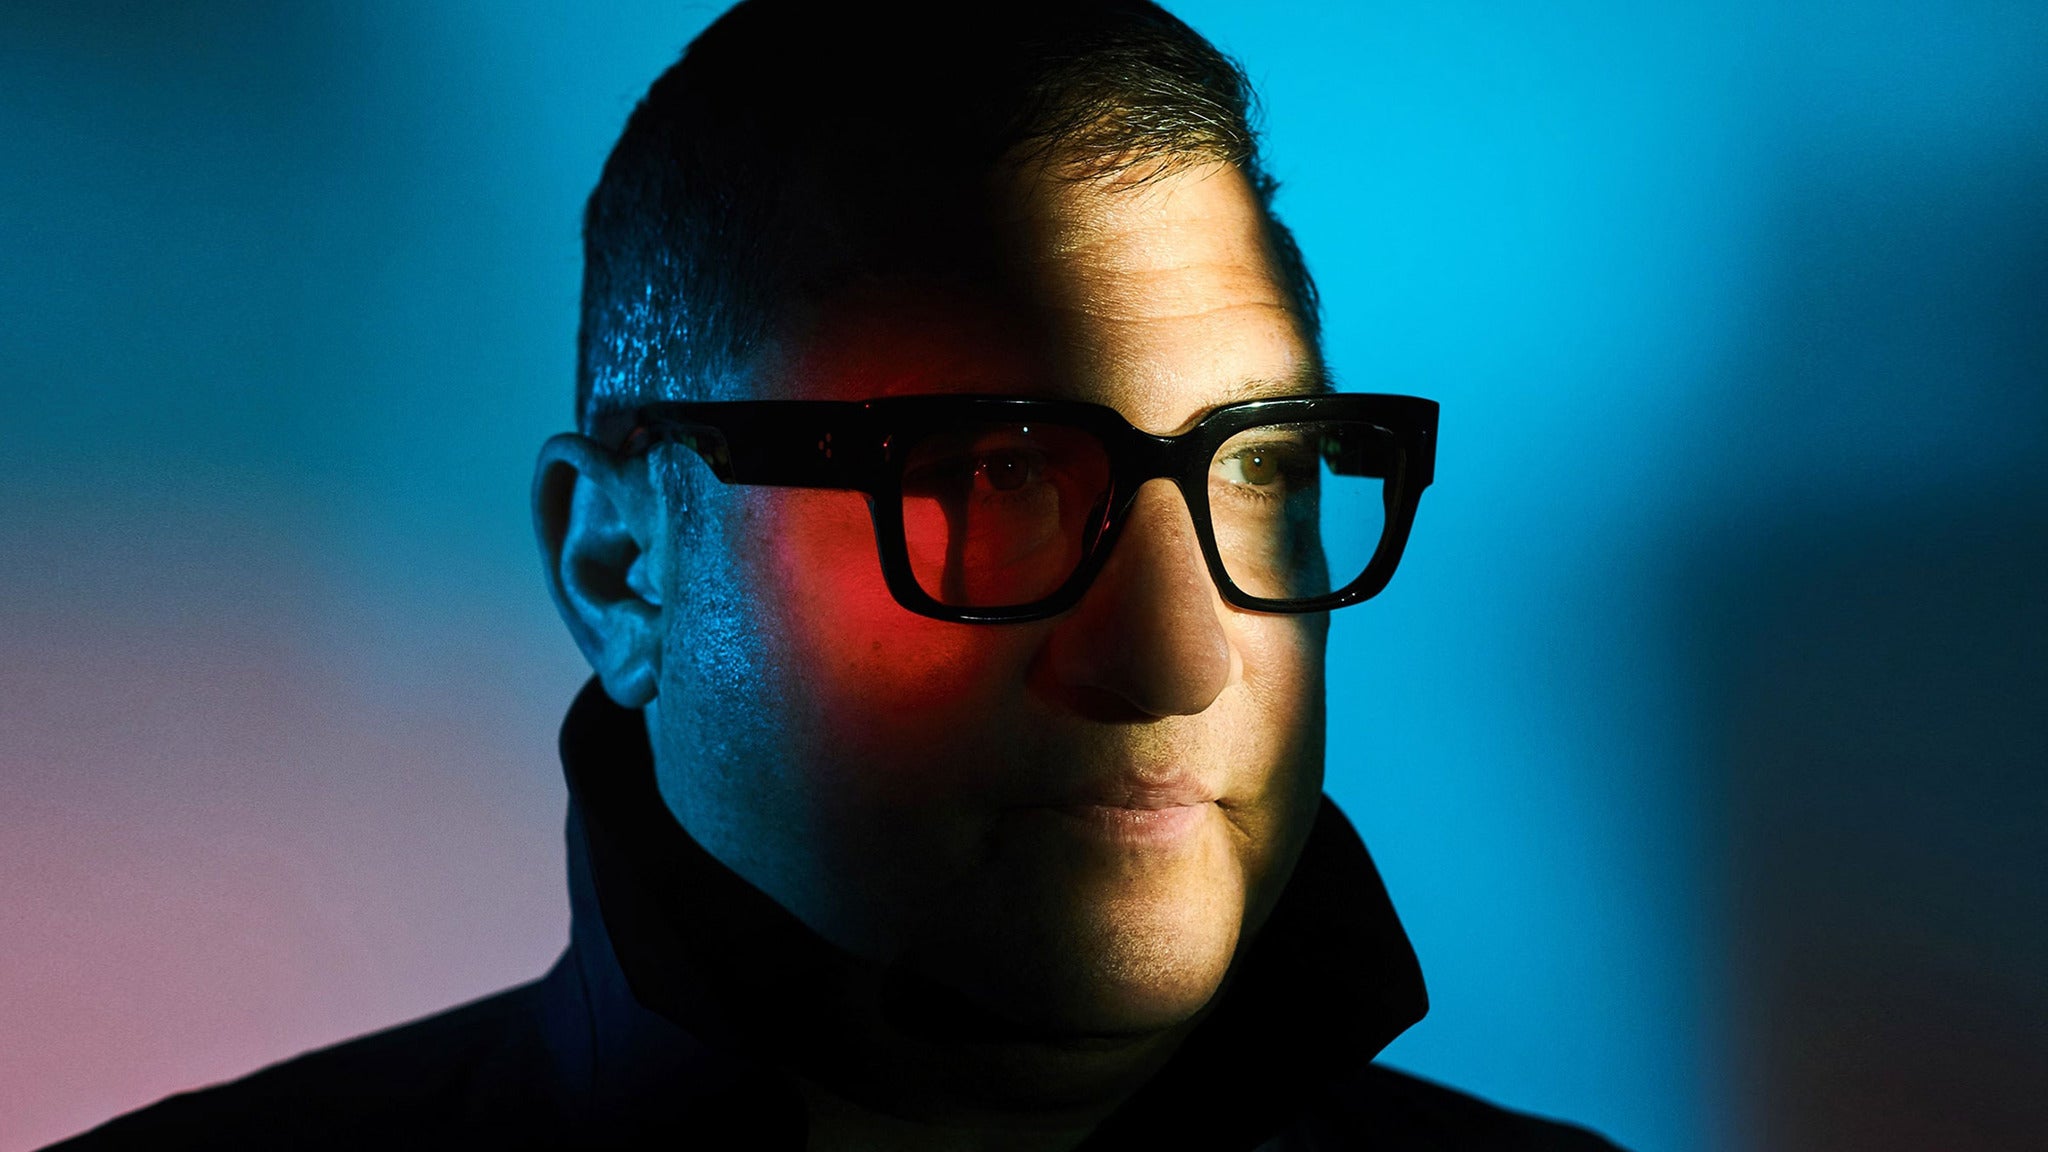 Greg Dulli in Los Angeles promo photo for Official Platinum presale offer code